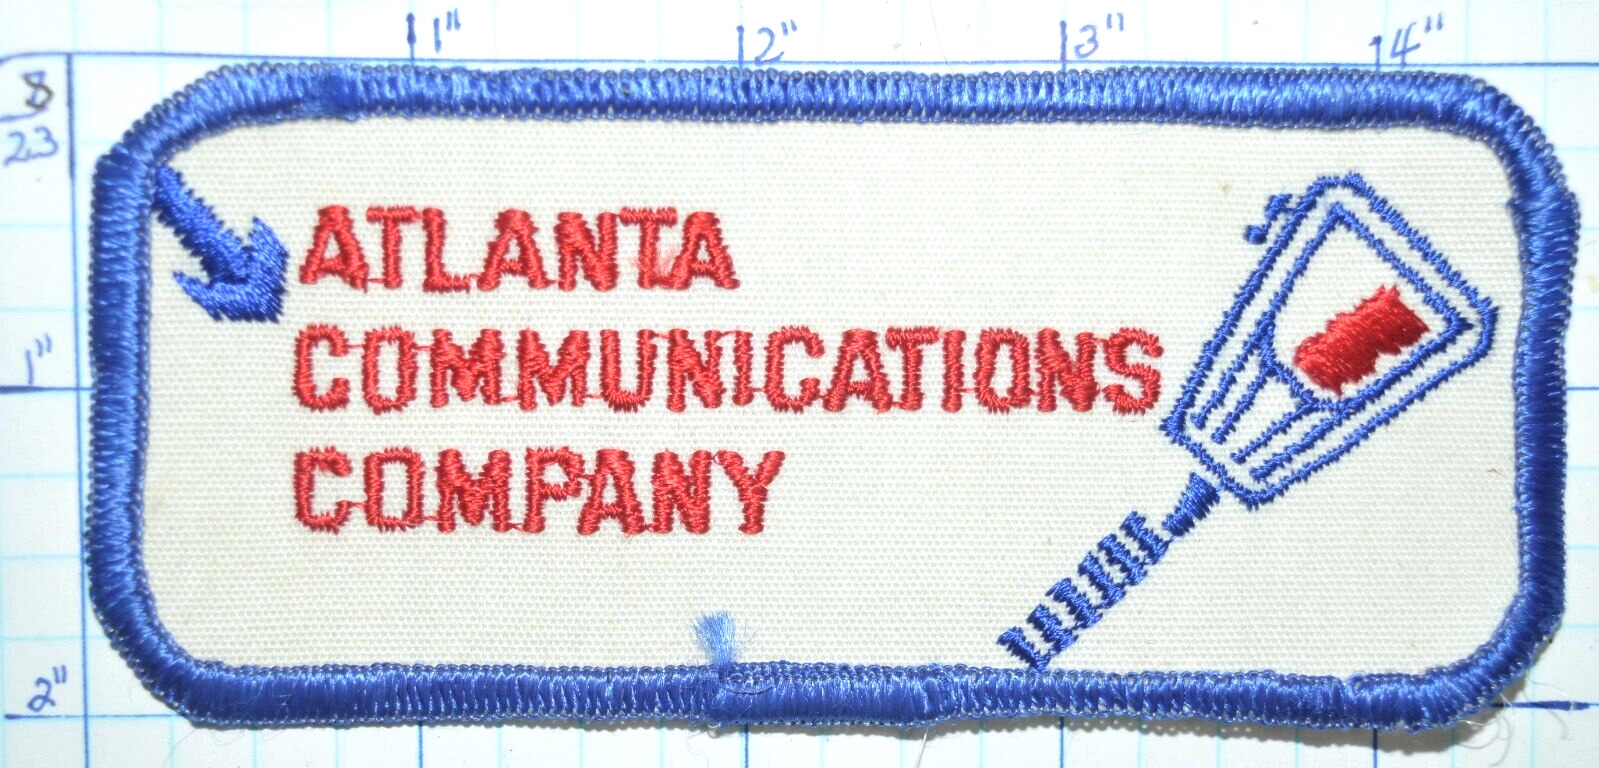 ATLANTA COMMUNICATIONS COMPANY WIRELESS SERVICES ADVERTISING VINTAGE PATCH